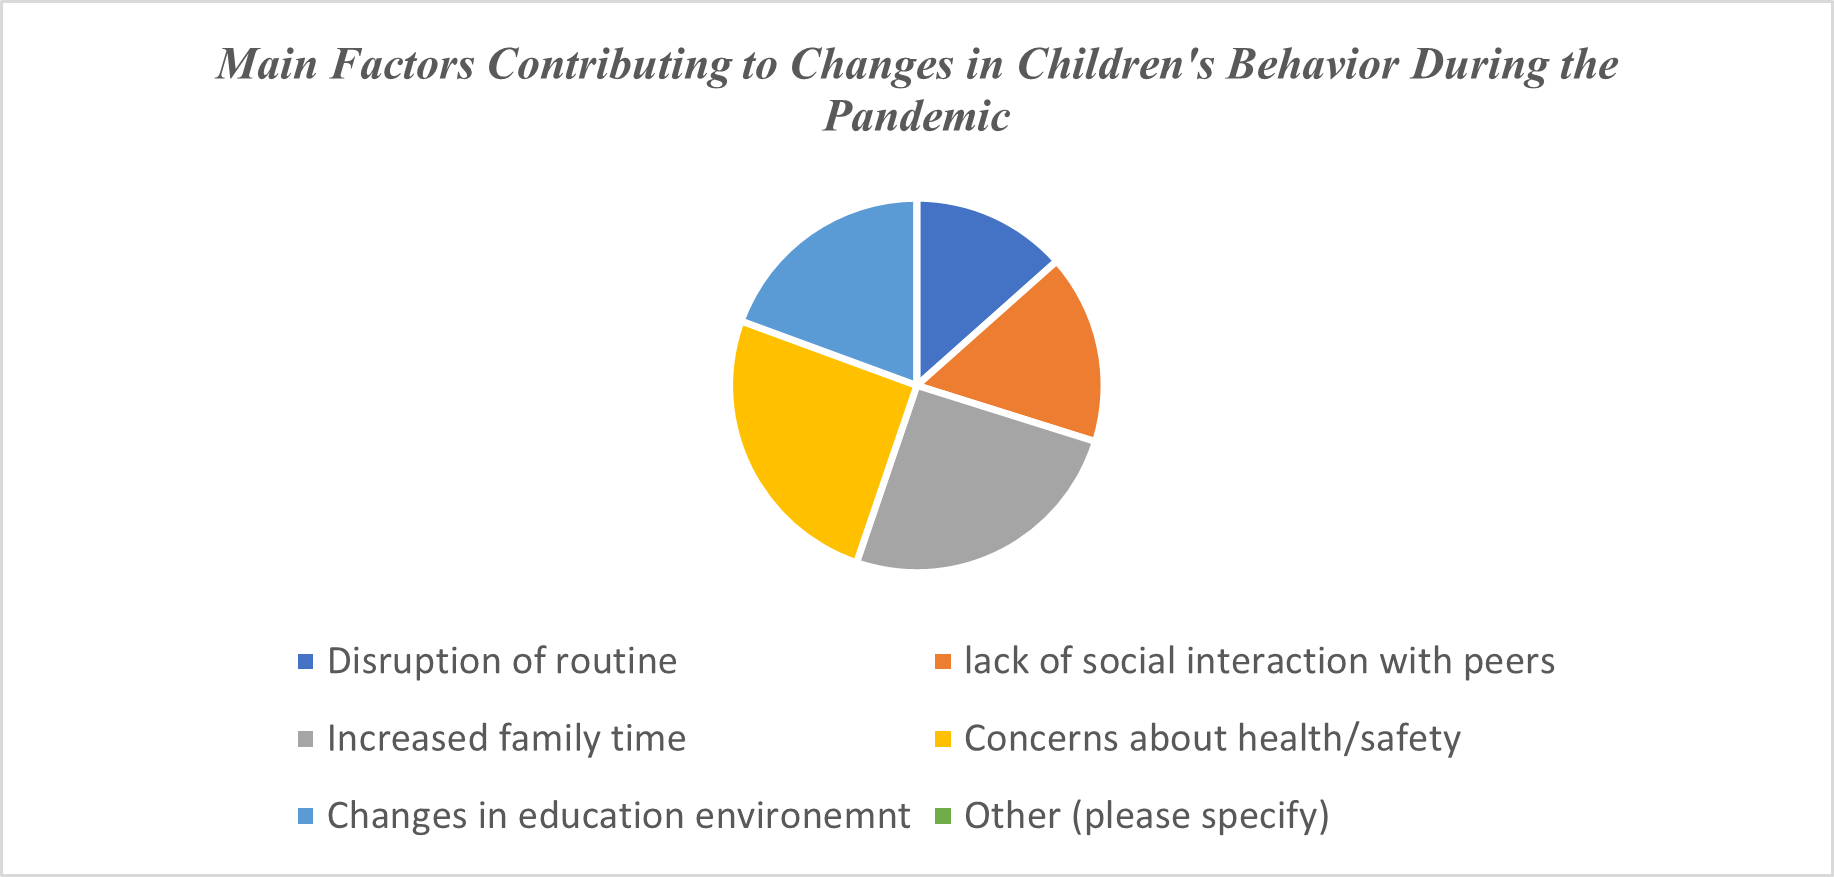 In your opinion, what are the main factors contributing to any changes in your child's behavior during the pandemic? Select all that apply.